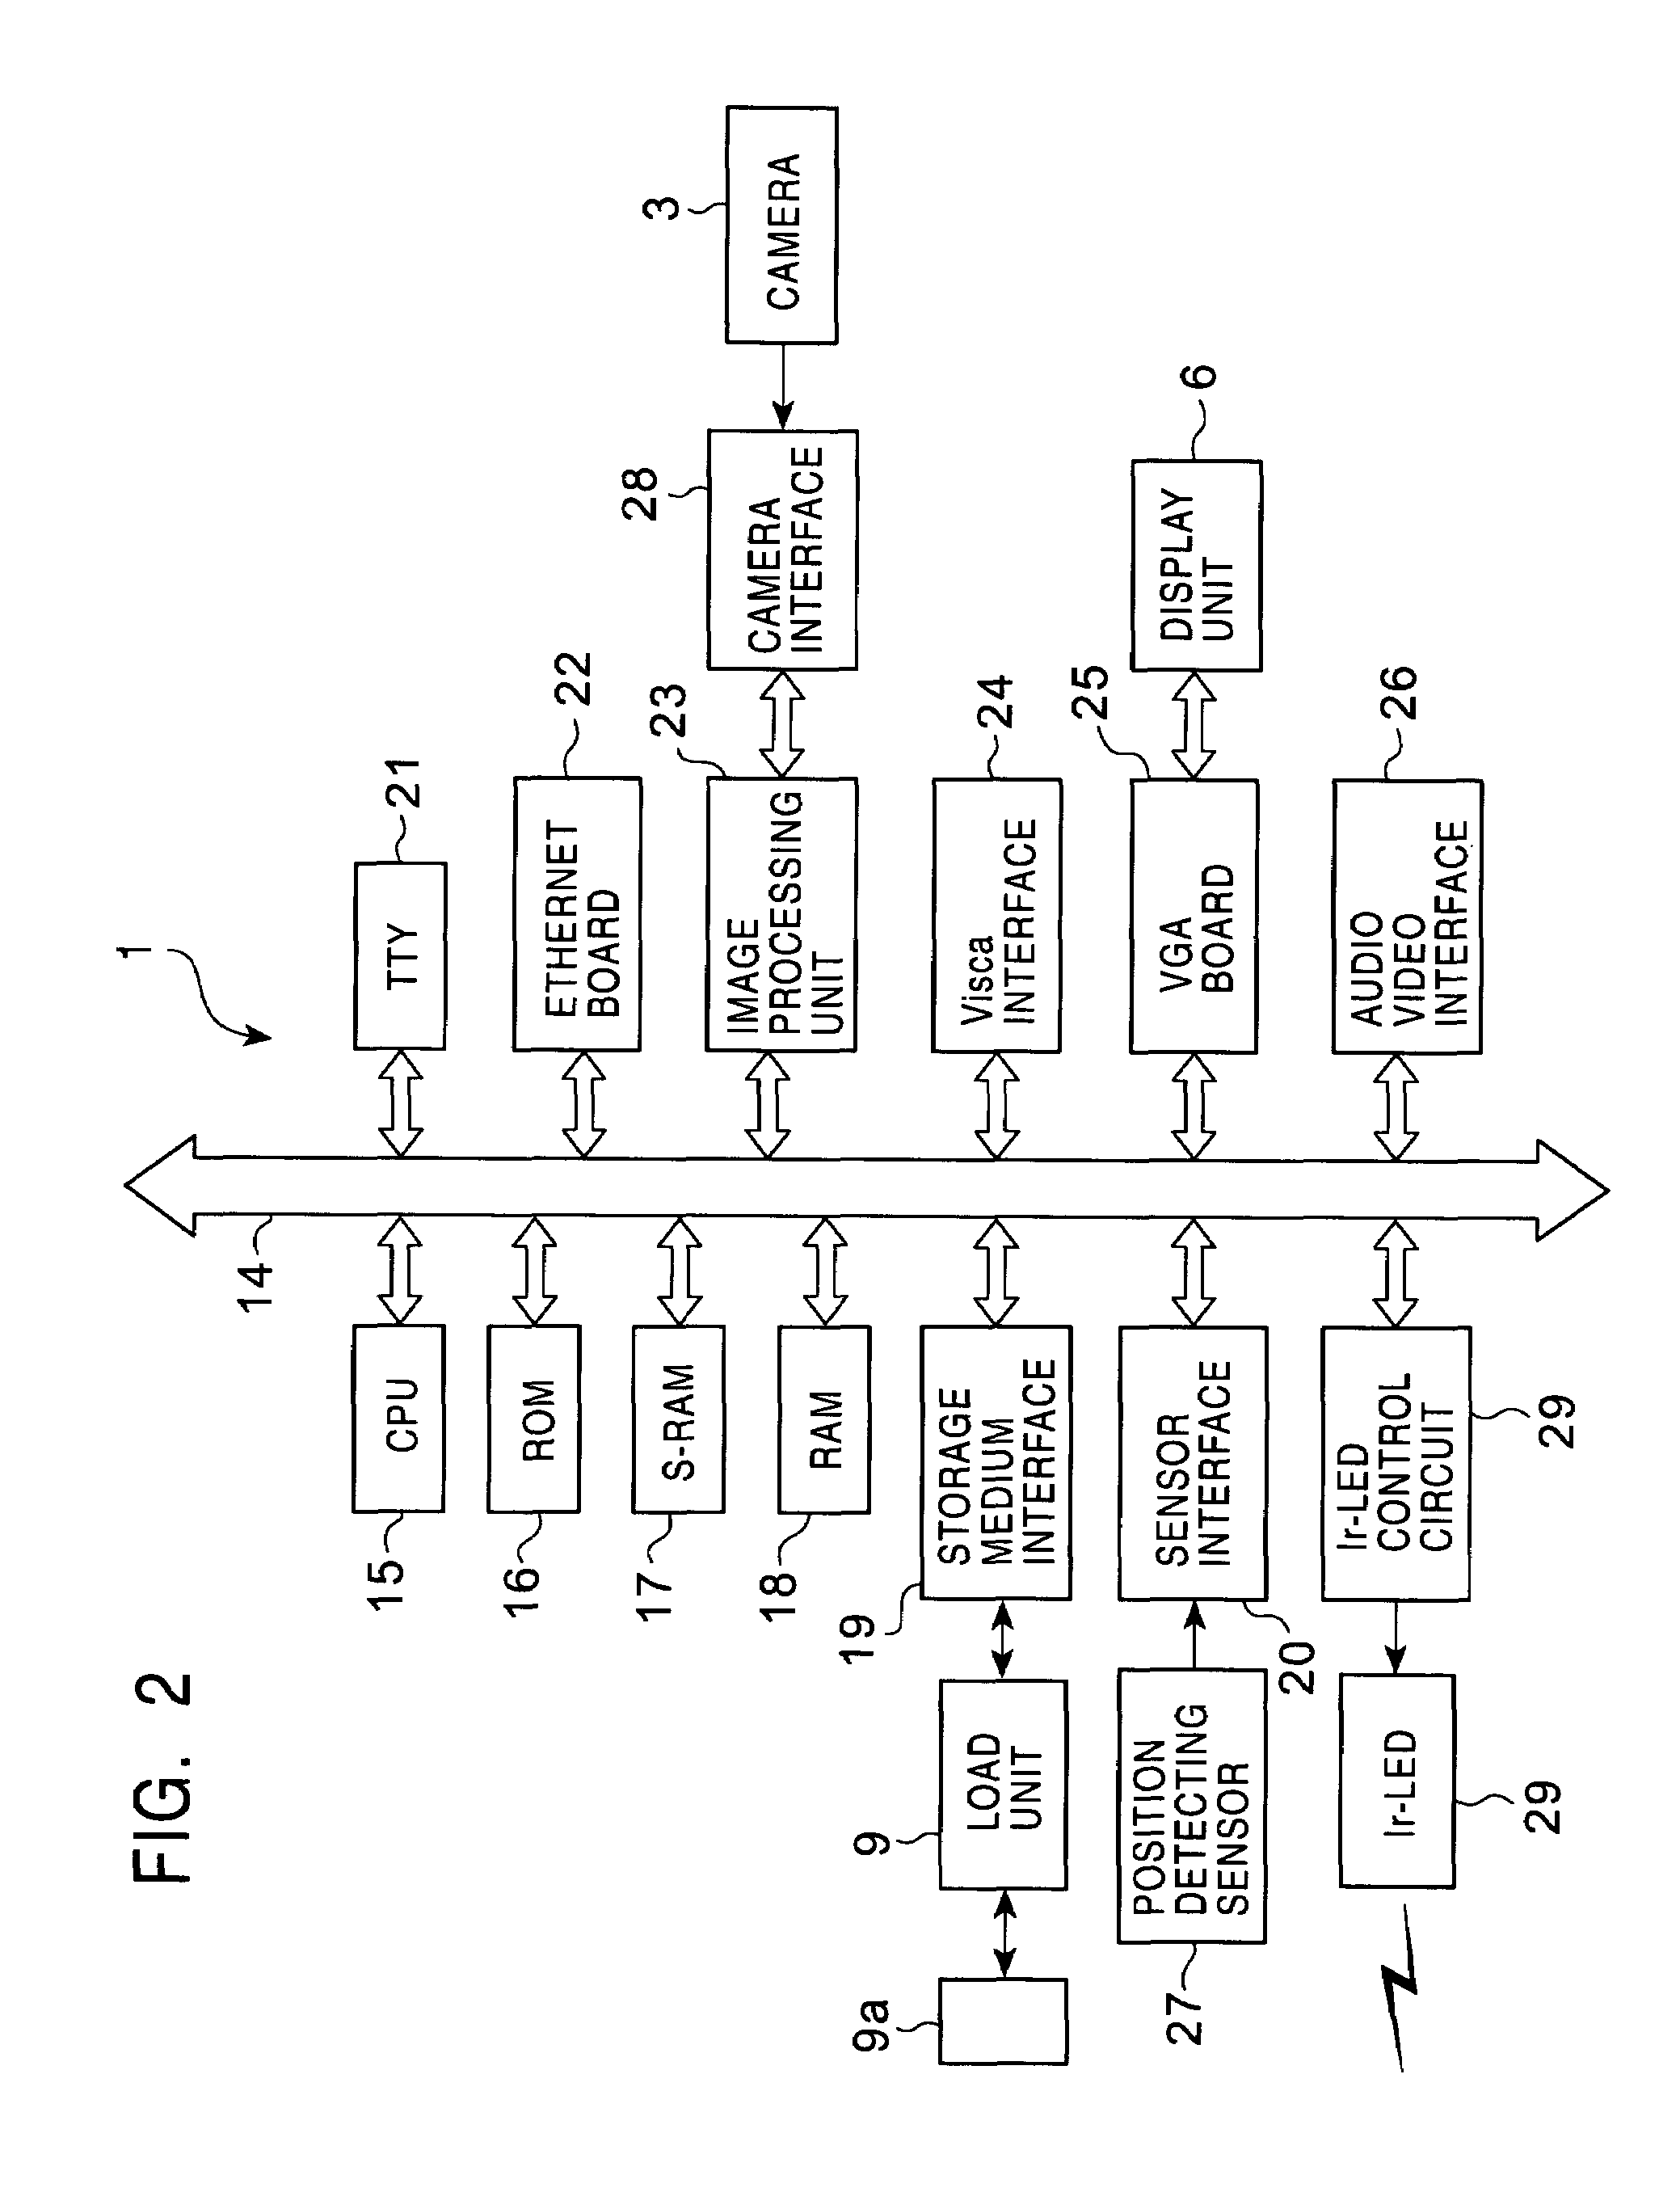 Terminal and method for remotely controlling device using the same